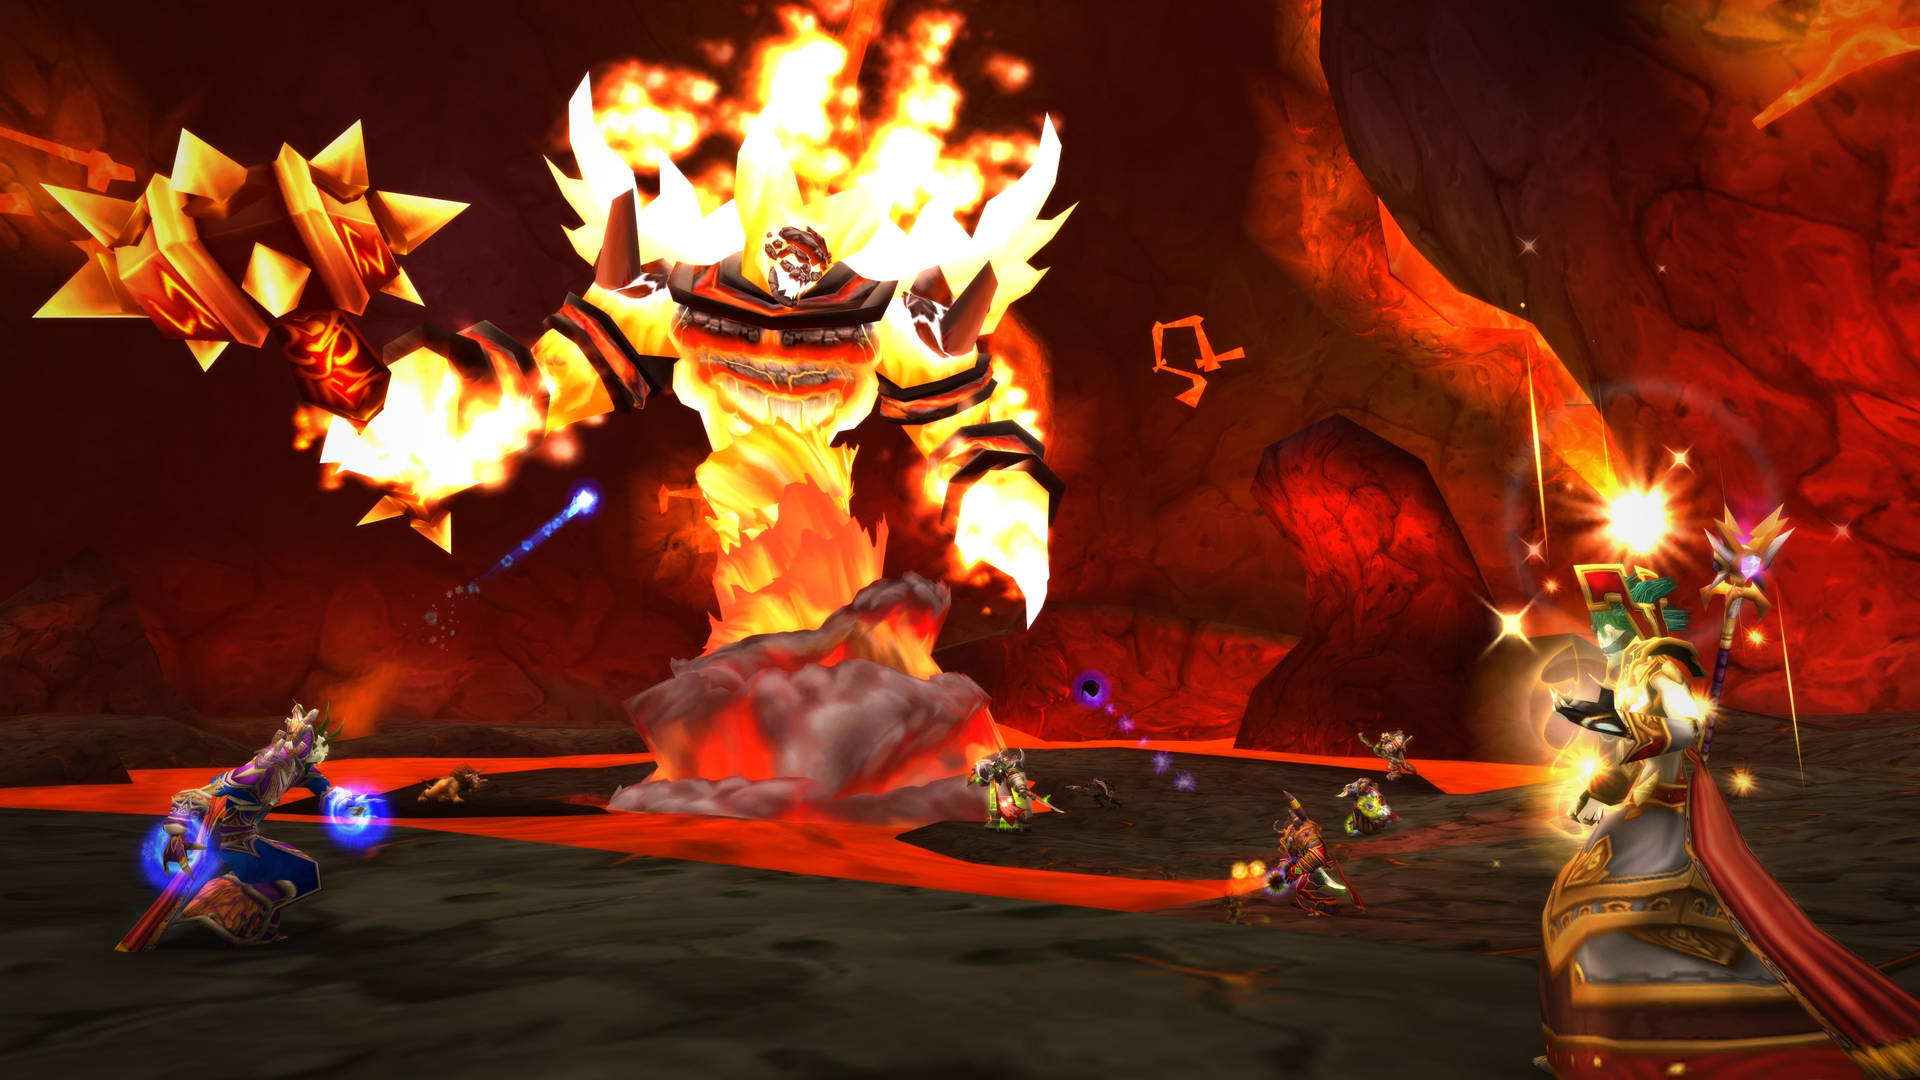 Firelord Wow Classic Background